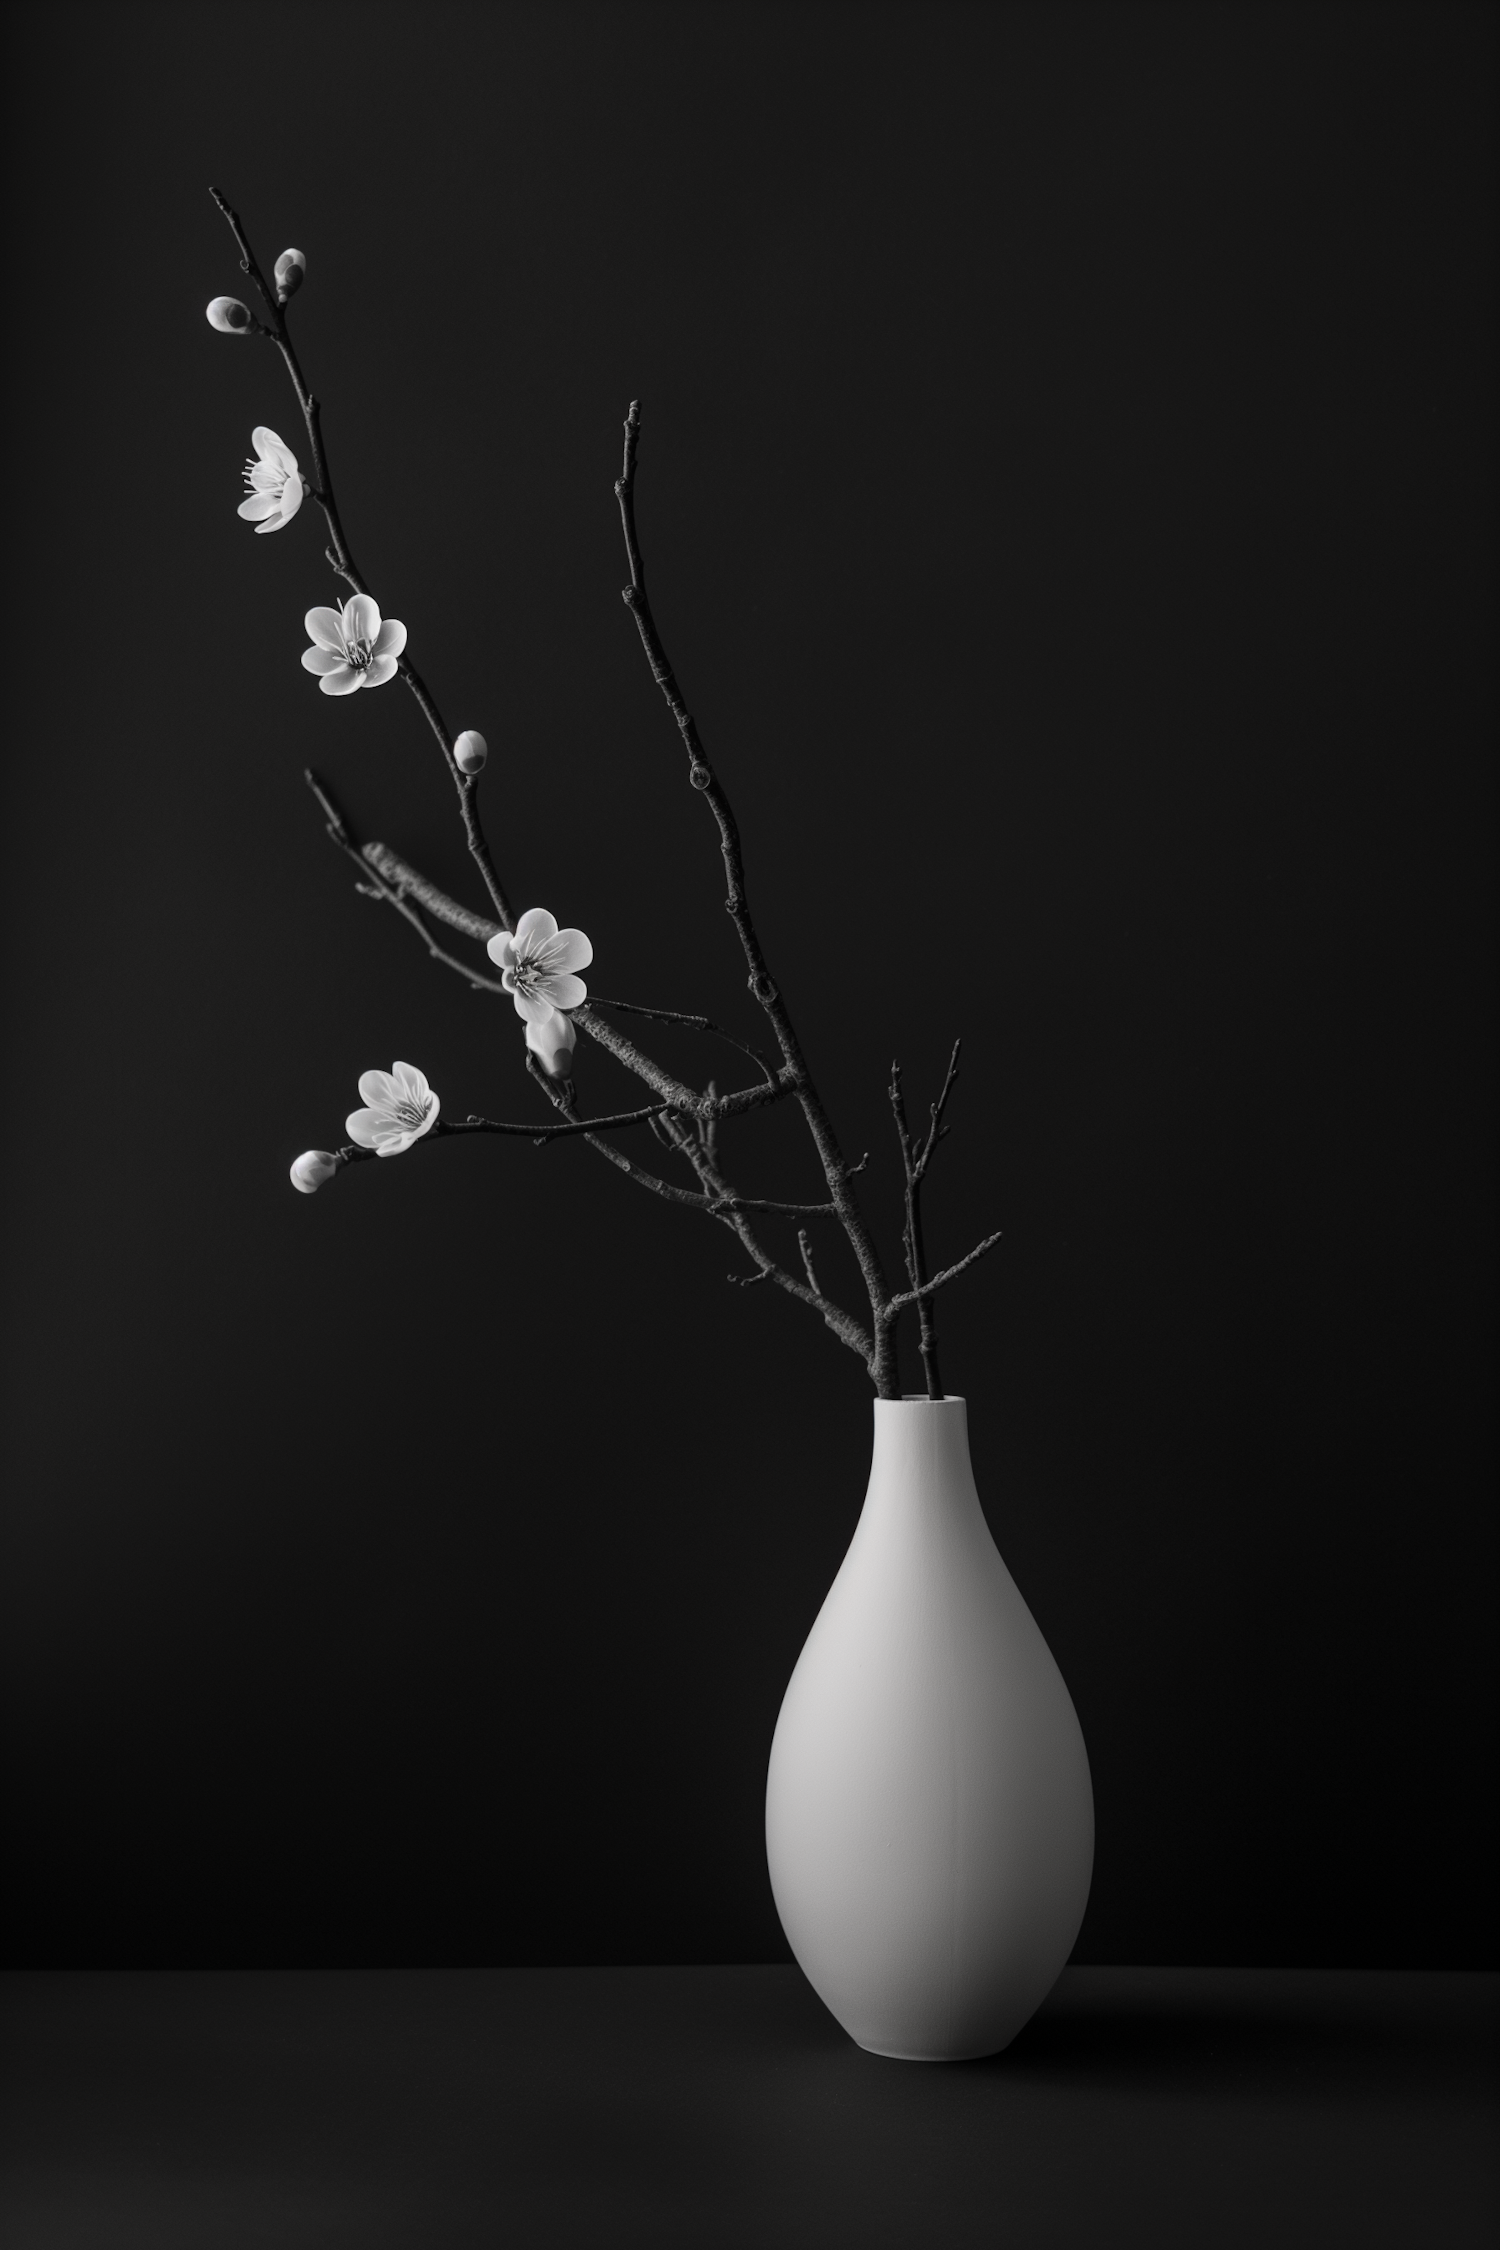 Monochrome Vase with Blossoming Branch